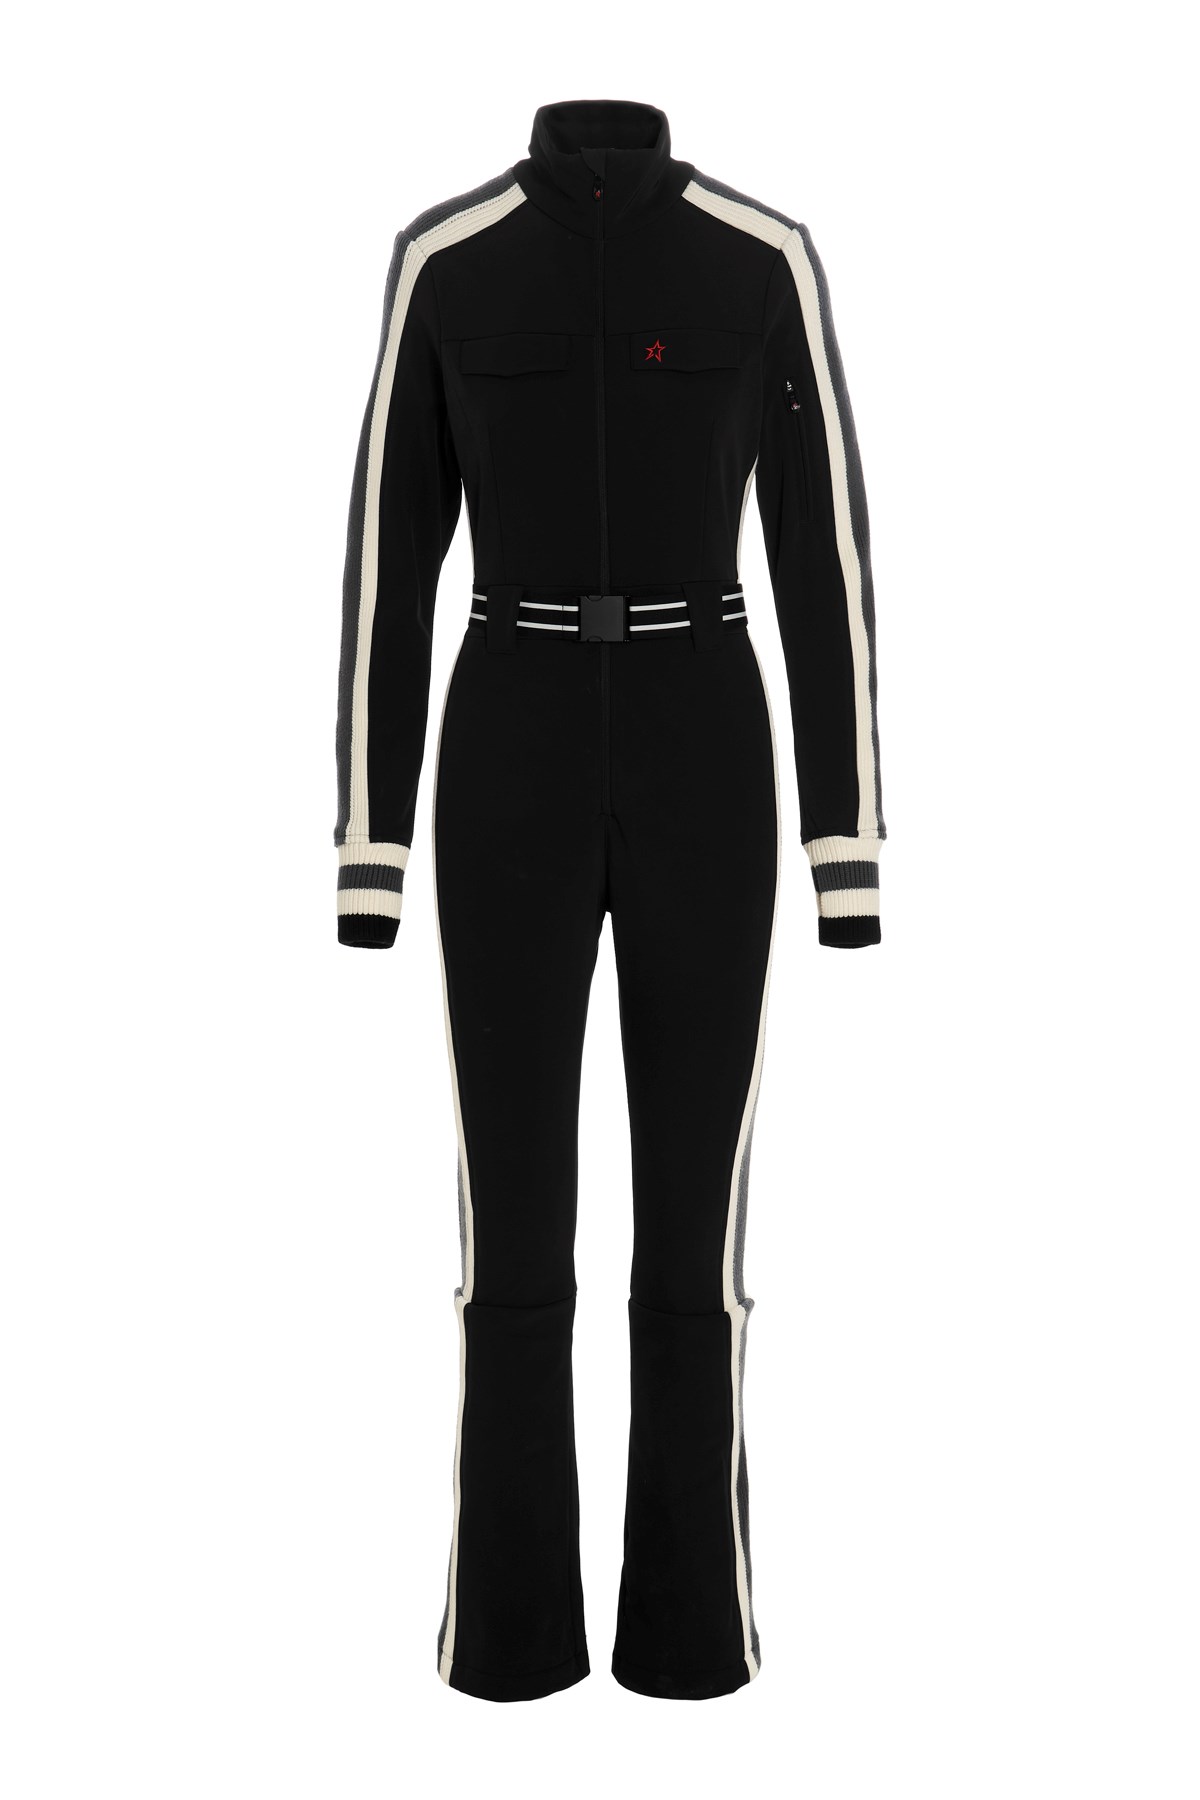 PERFECT MOMENT 'Crystal Soft Shell One Piece’ Ski Suit